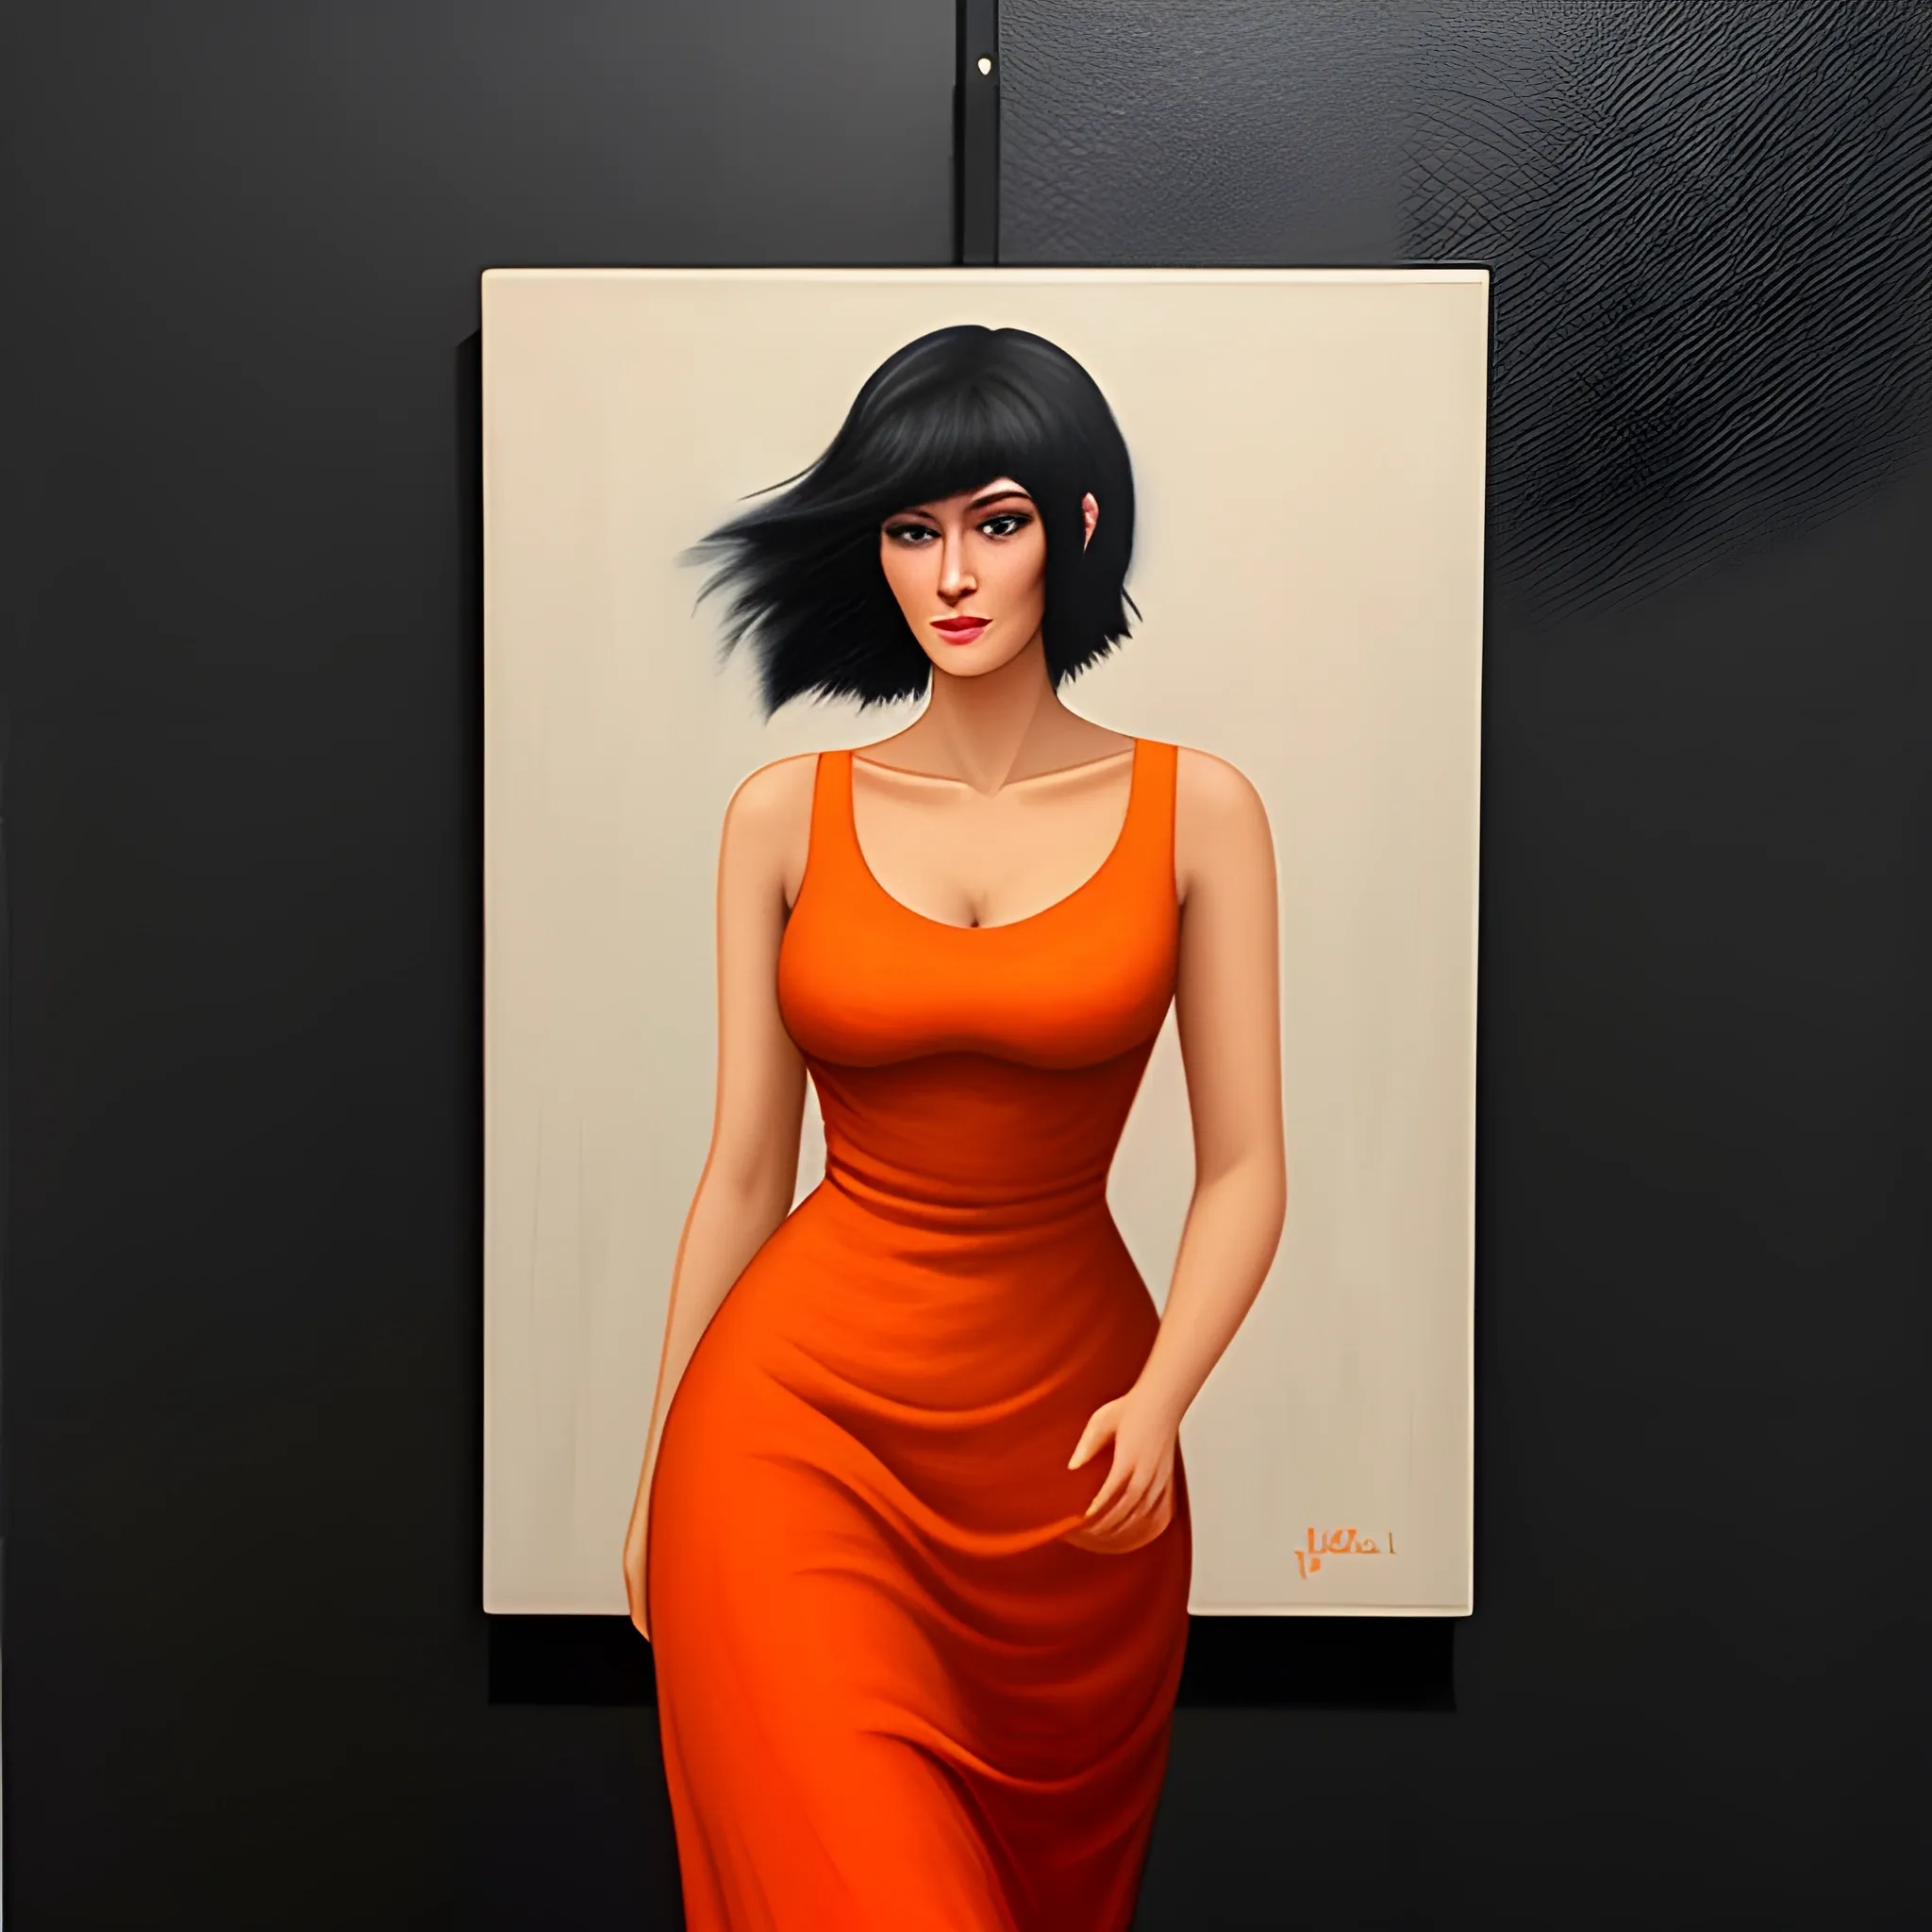 A 20-year-old young woman with short black hair, an innocent and beautiful face, wearing an orange long dress, walking on the street, oil painting style
